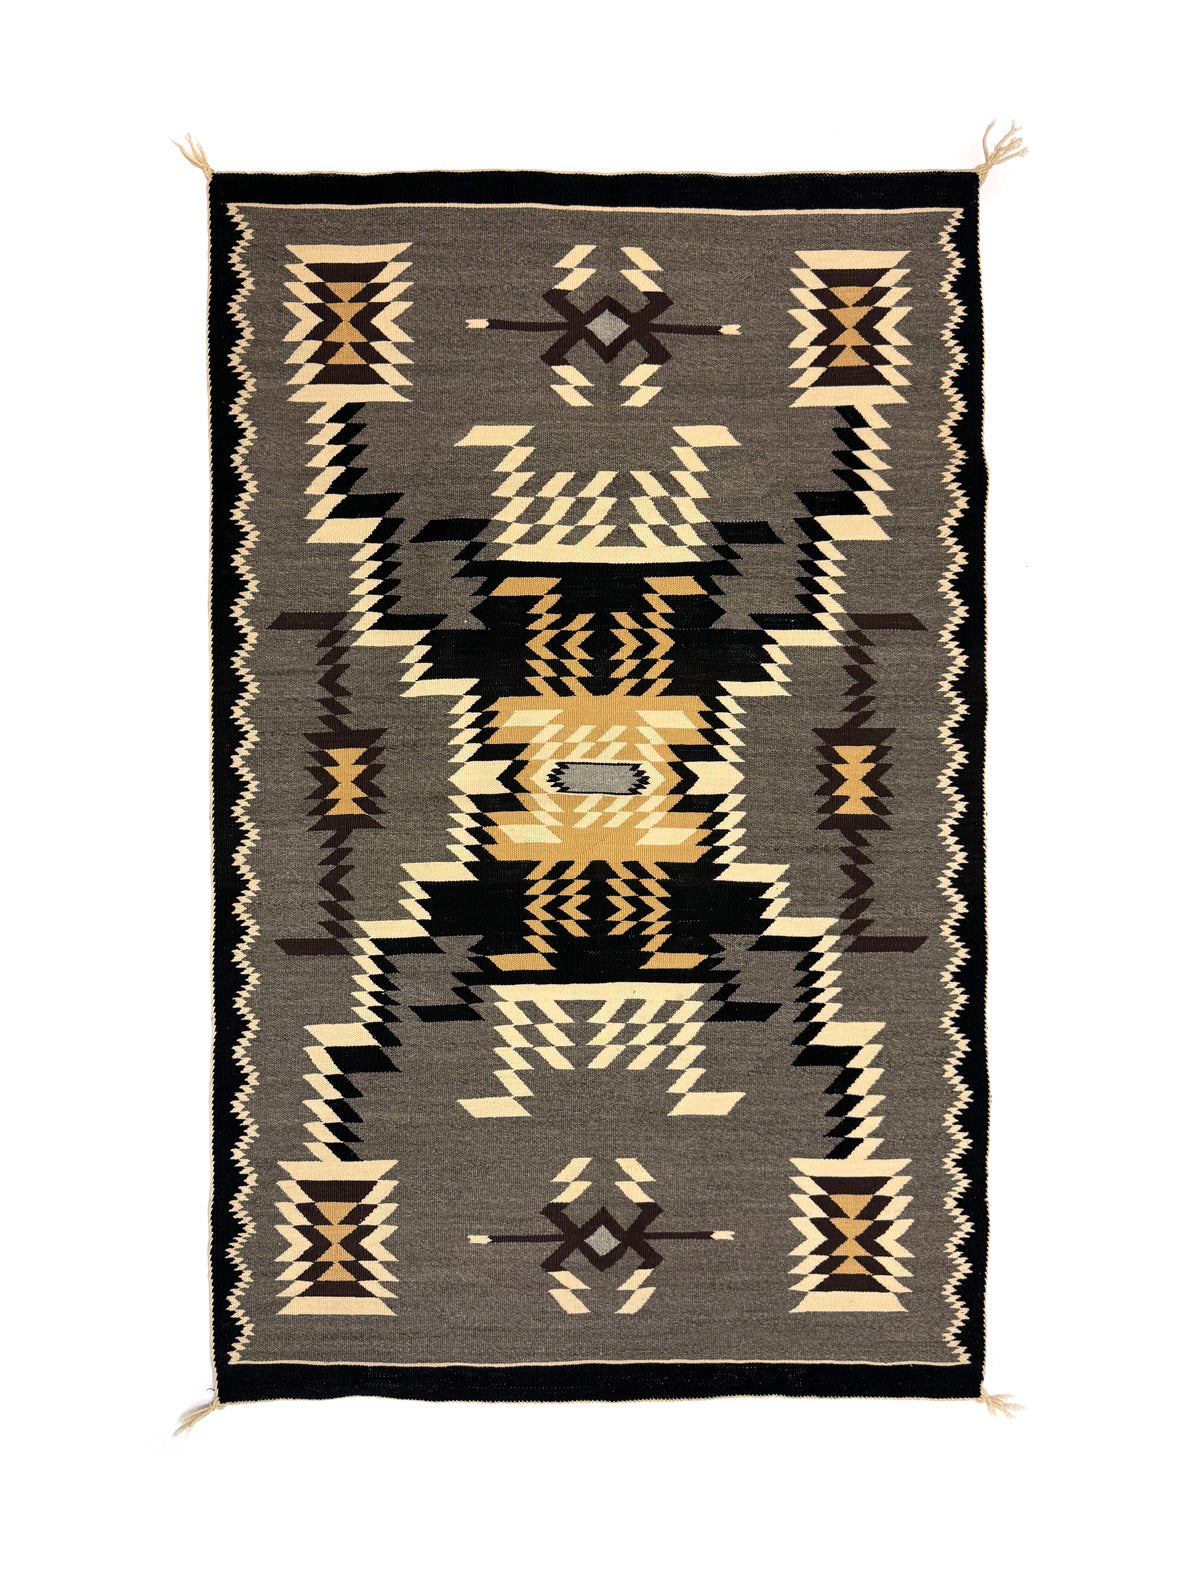 Navajo Crystal Storm Pattern Rug with Waterbug Pictorials c. 1960-70s, 69" x 44" (T6591)